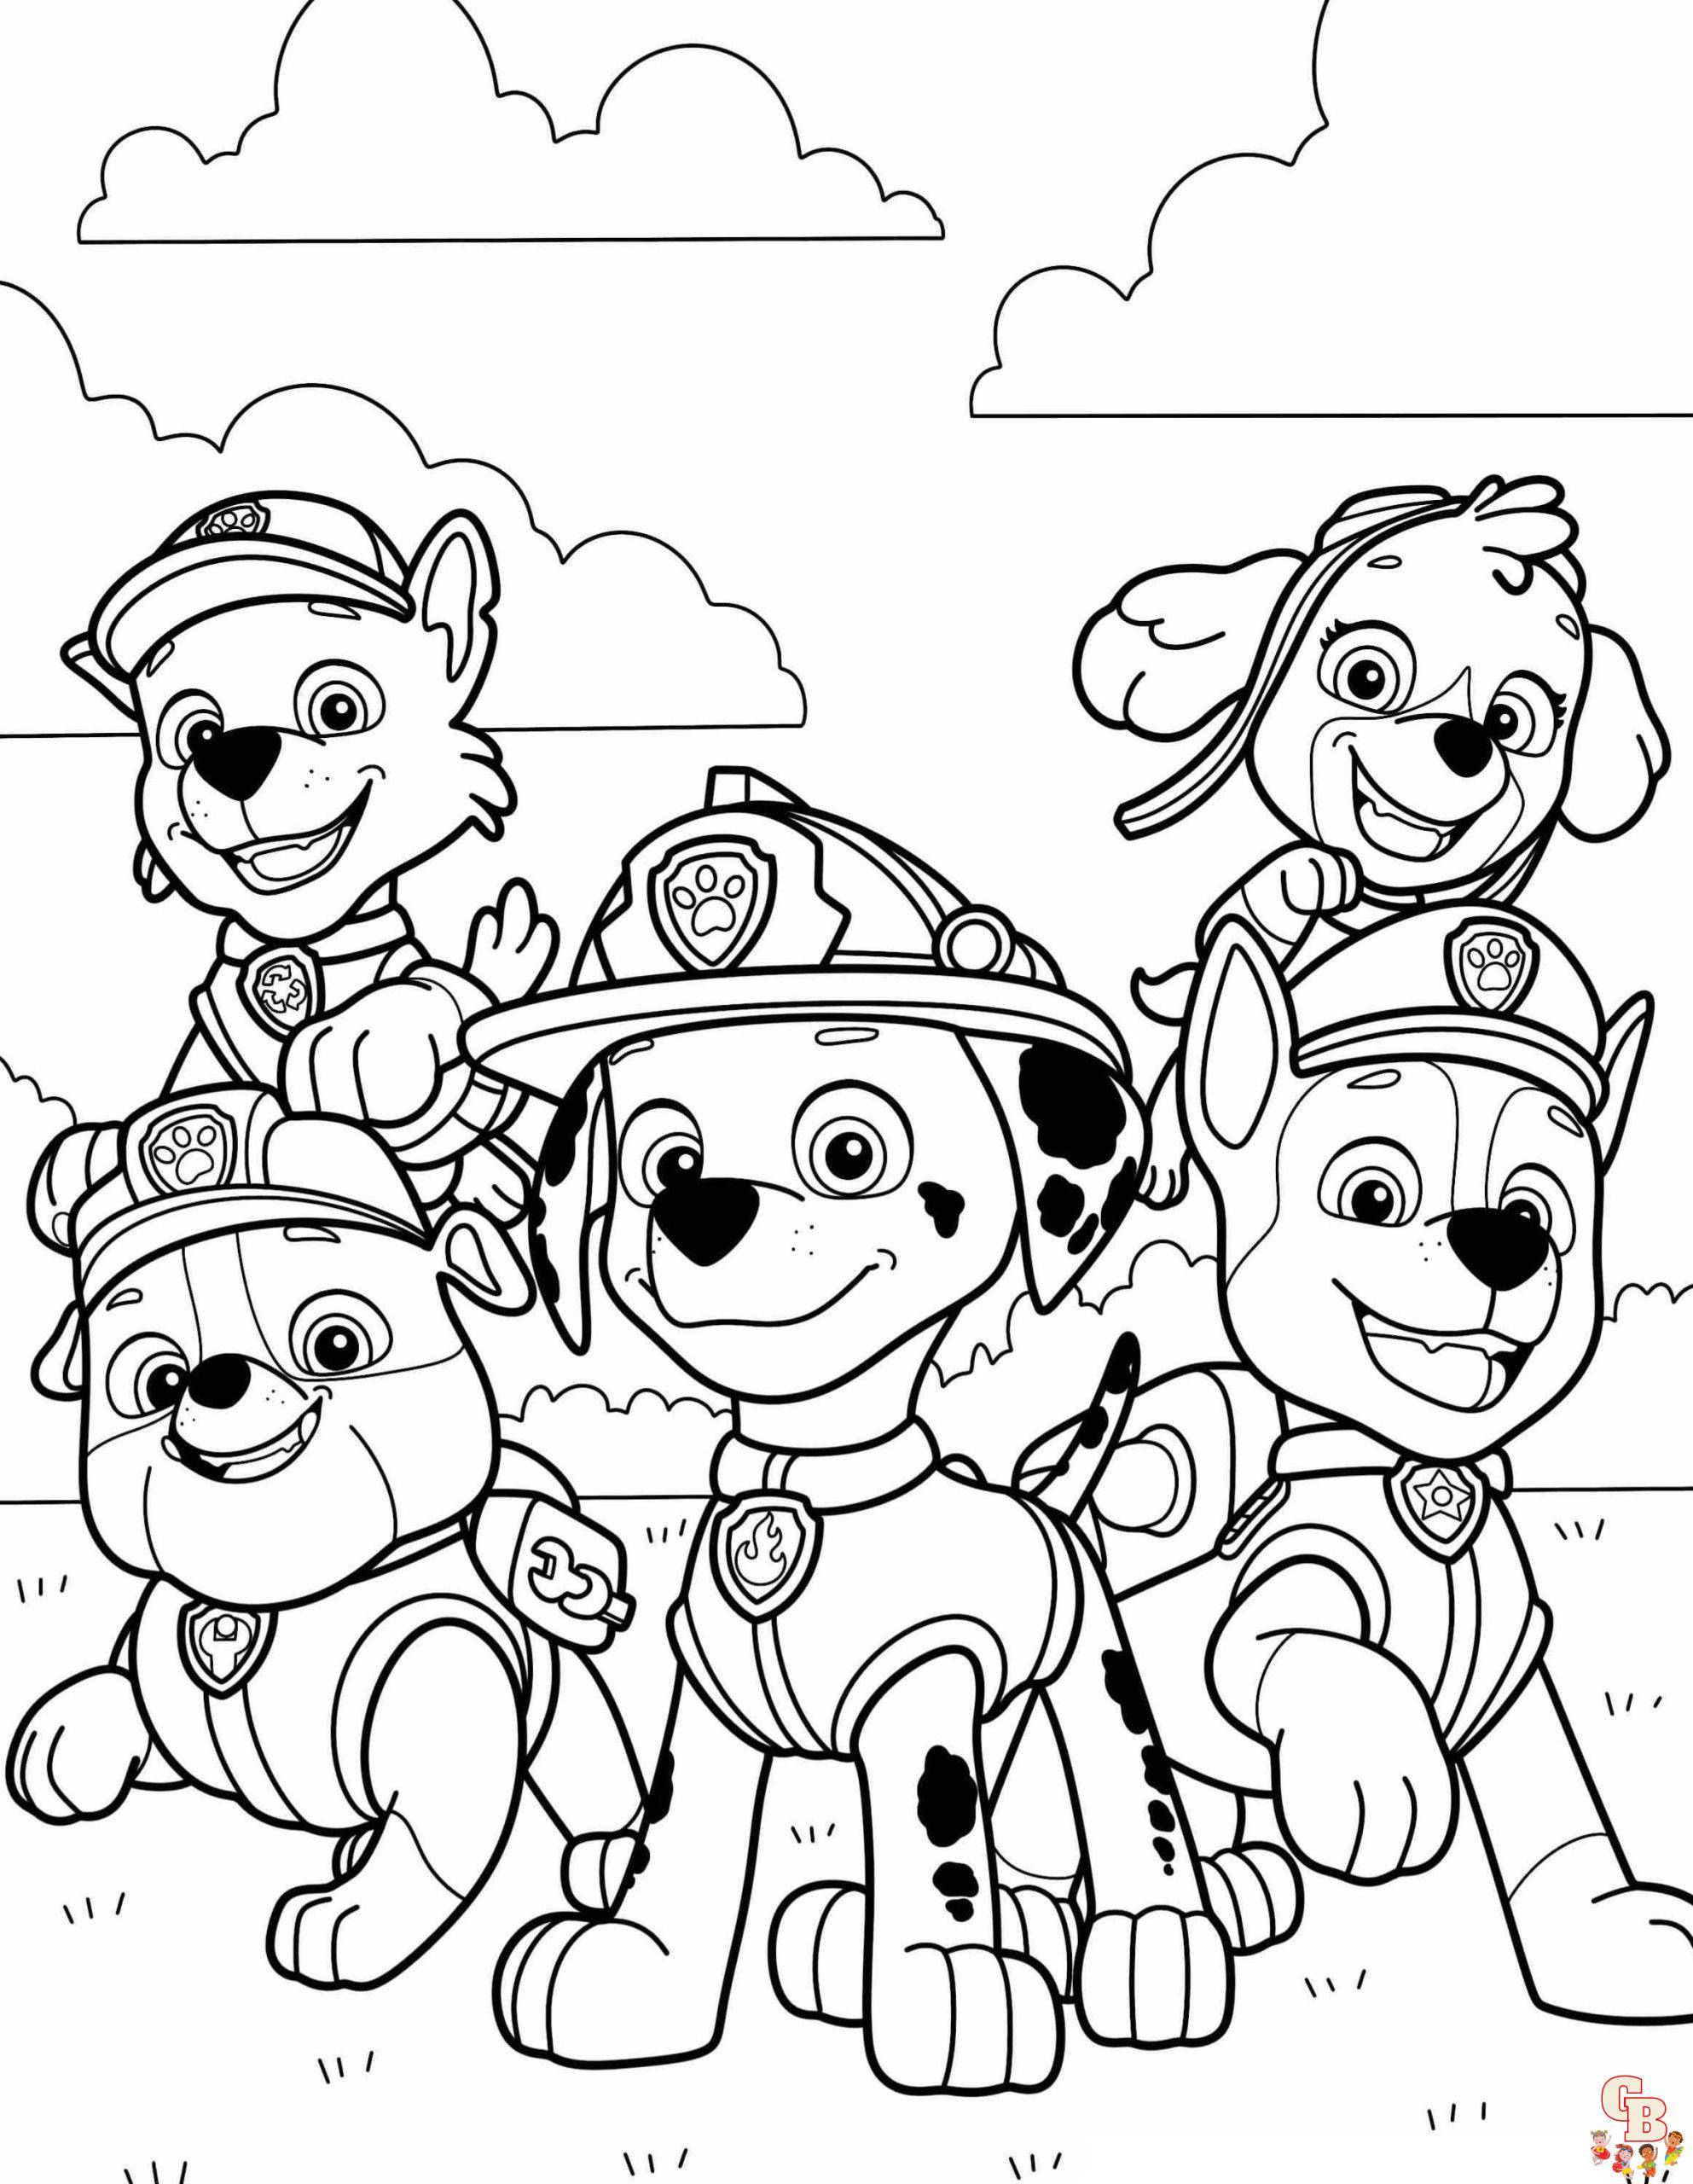 Discover the best free paw patrol coloring pages printable